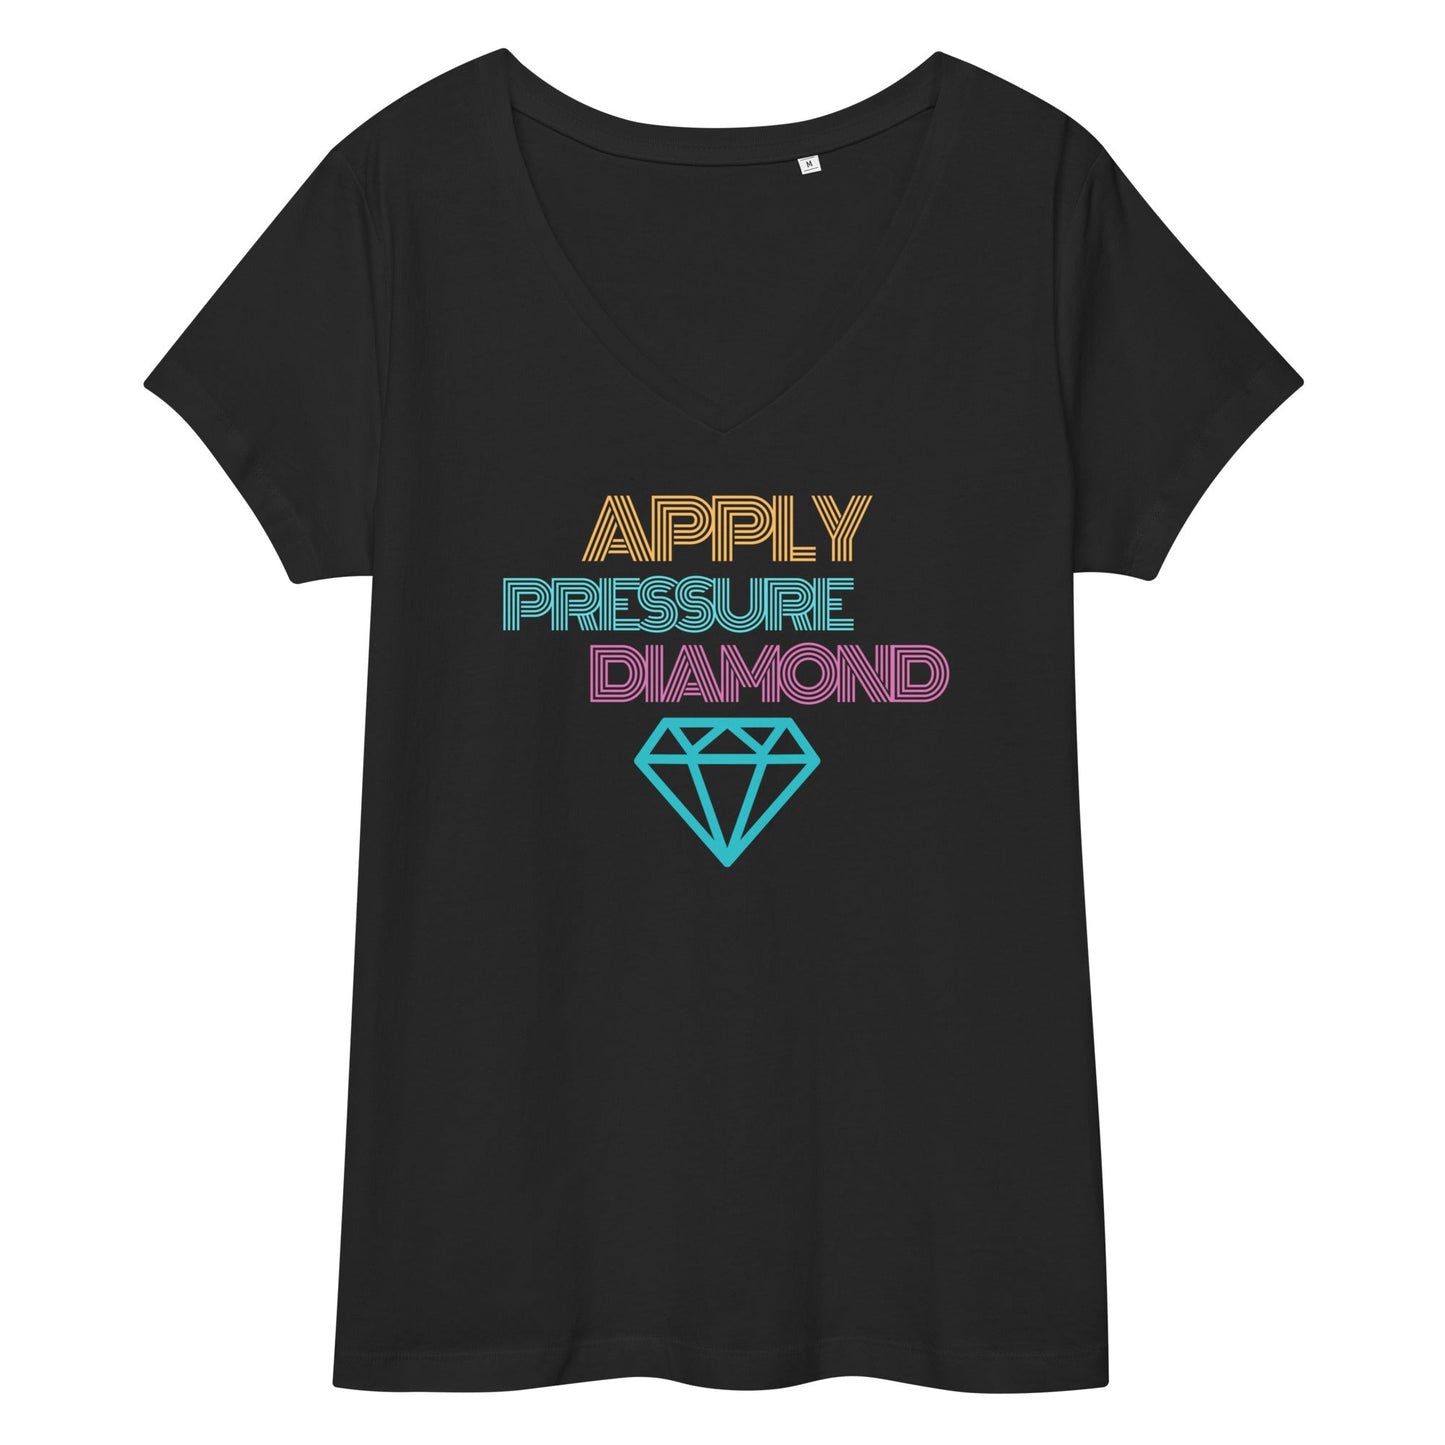 Apply Pressure Diamond Women’s fitted v-neck t-shirt - Catch This Tea Shirts